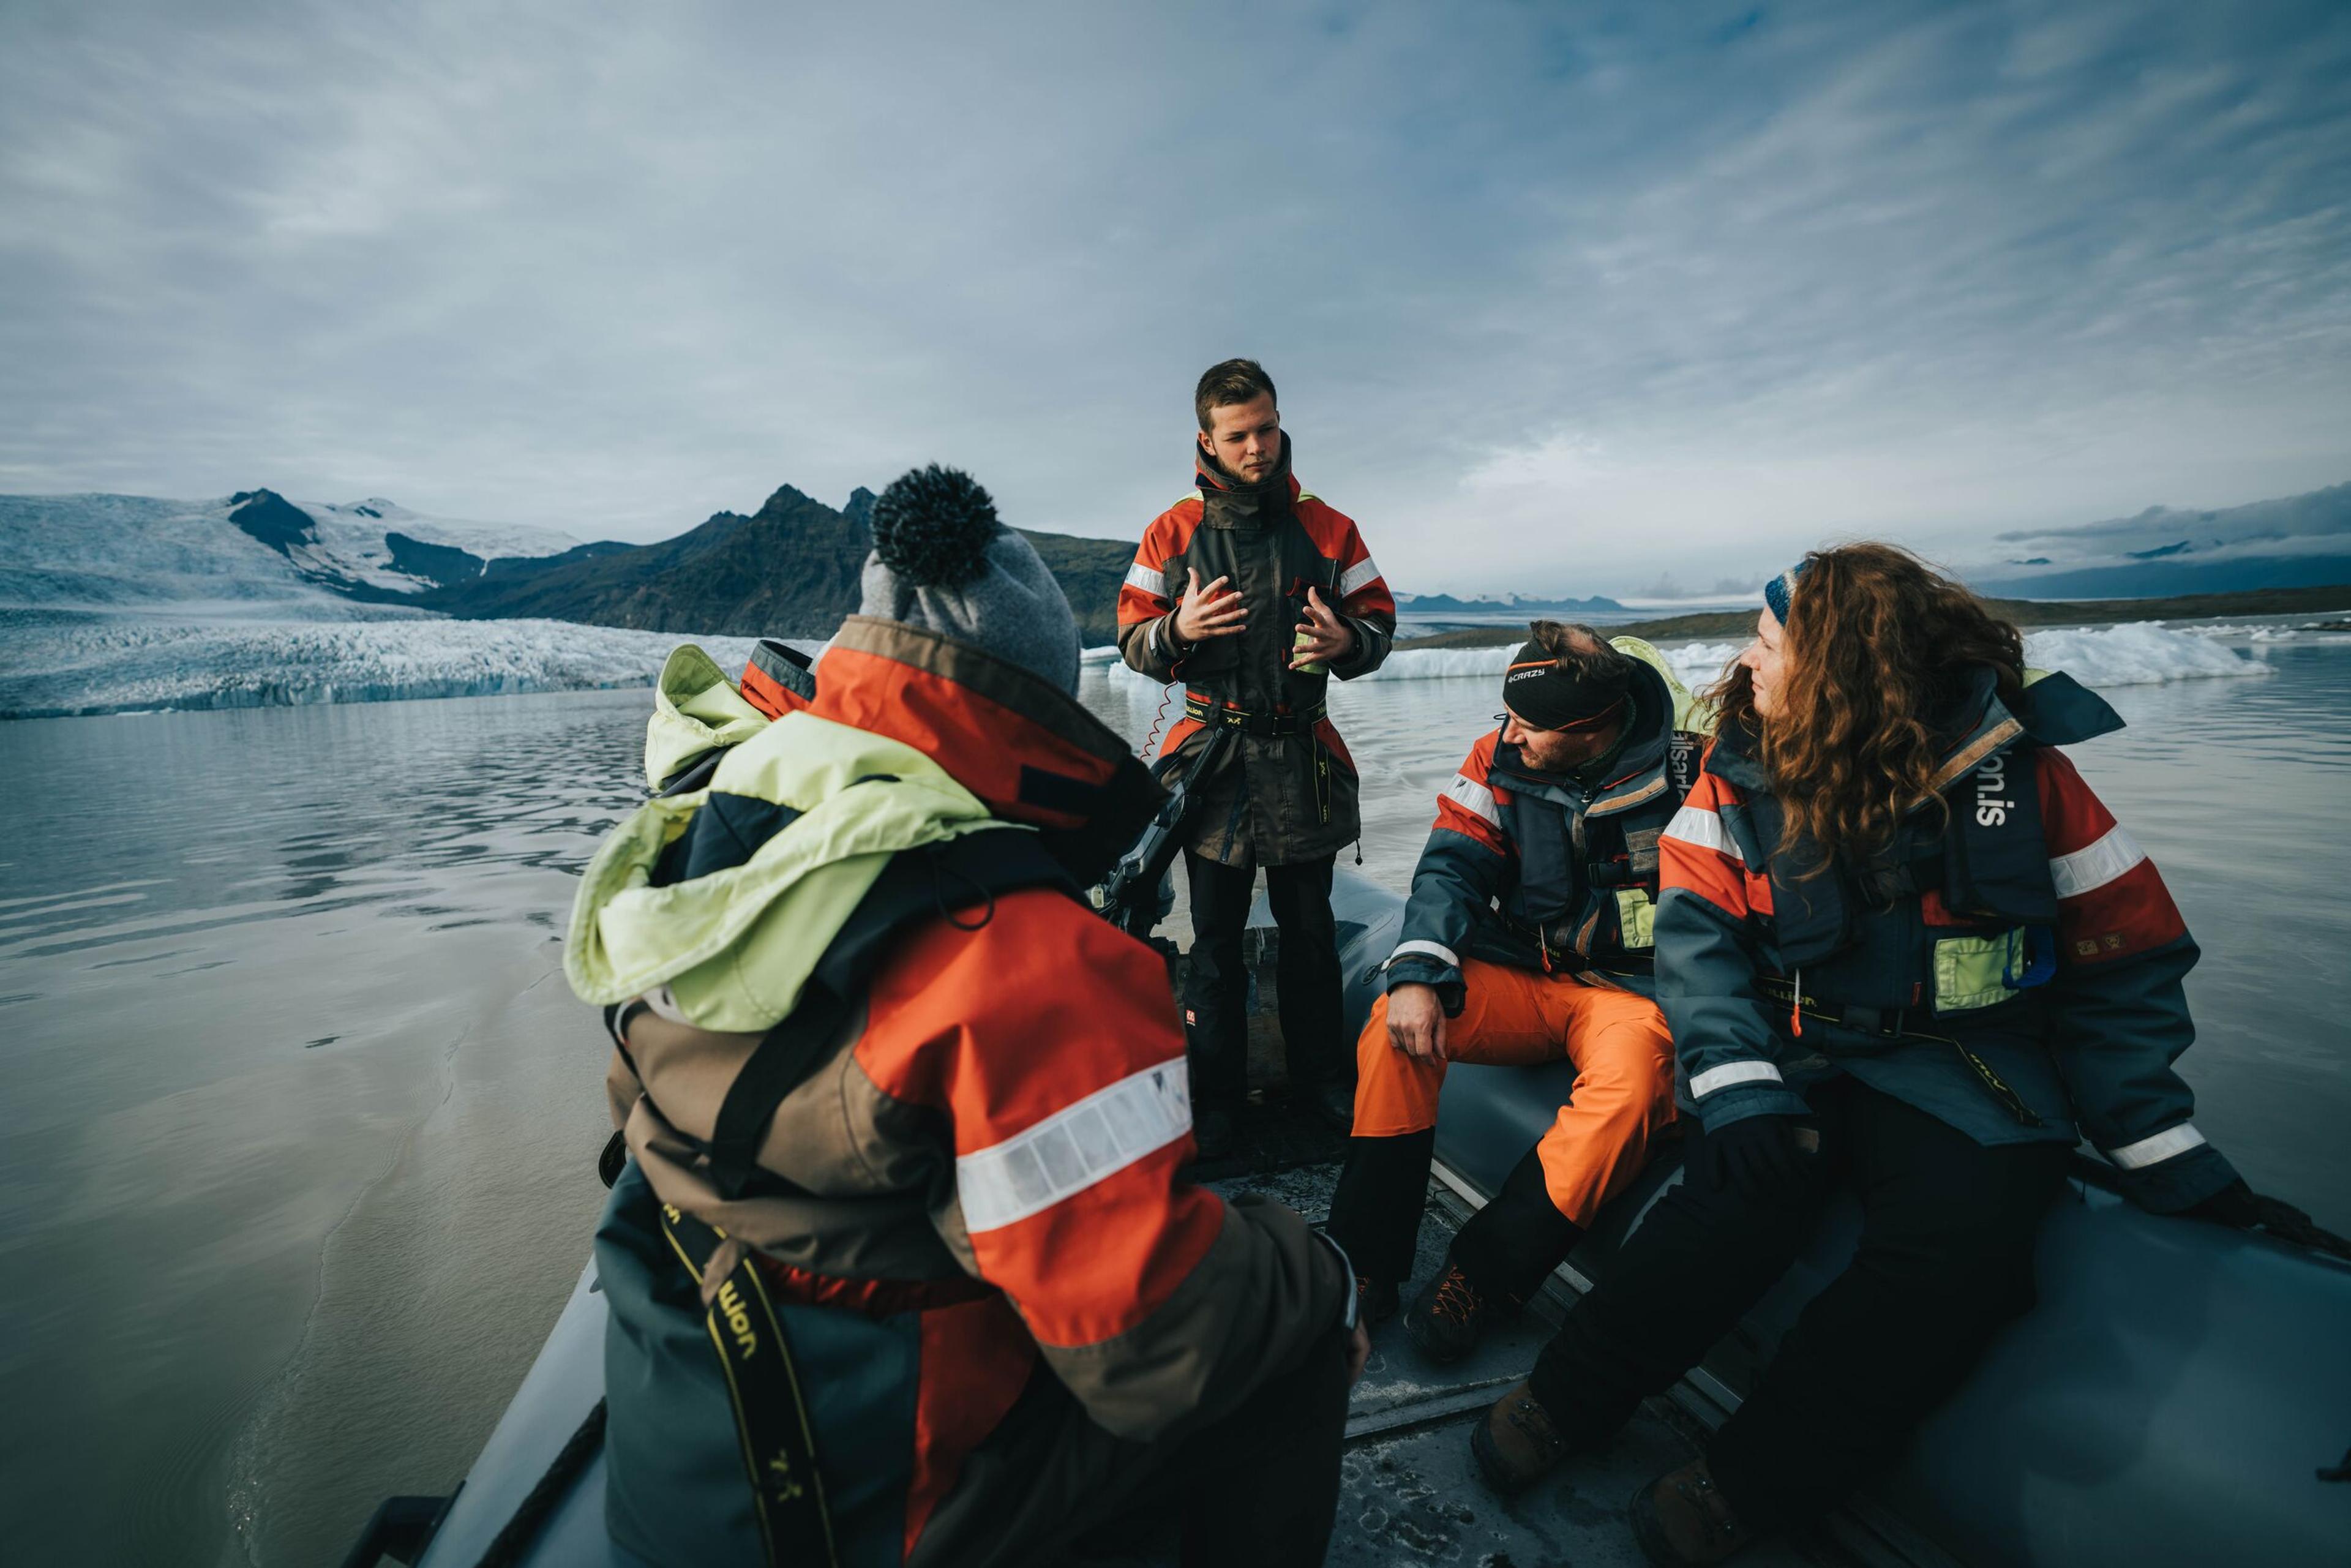 A guide with a group of tourist on a boat sailing on the Fjallsárlón glacier lagoon in Iceland.